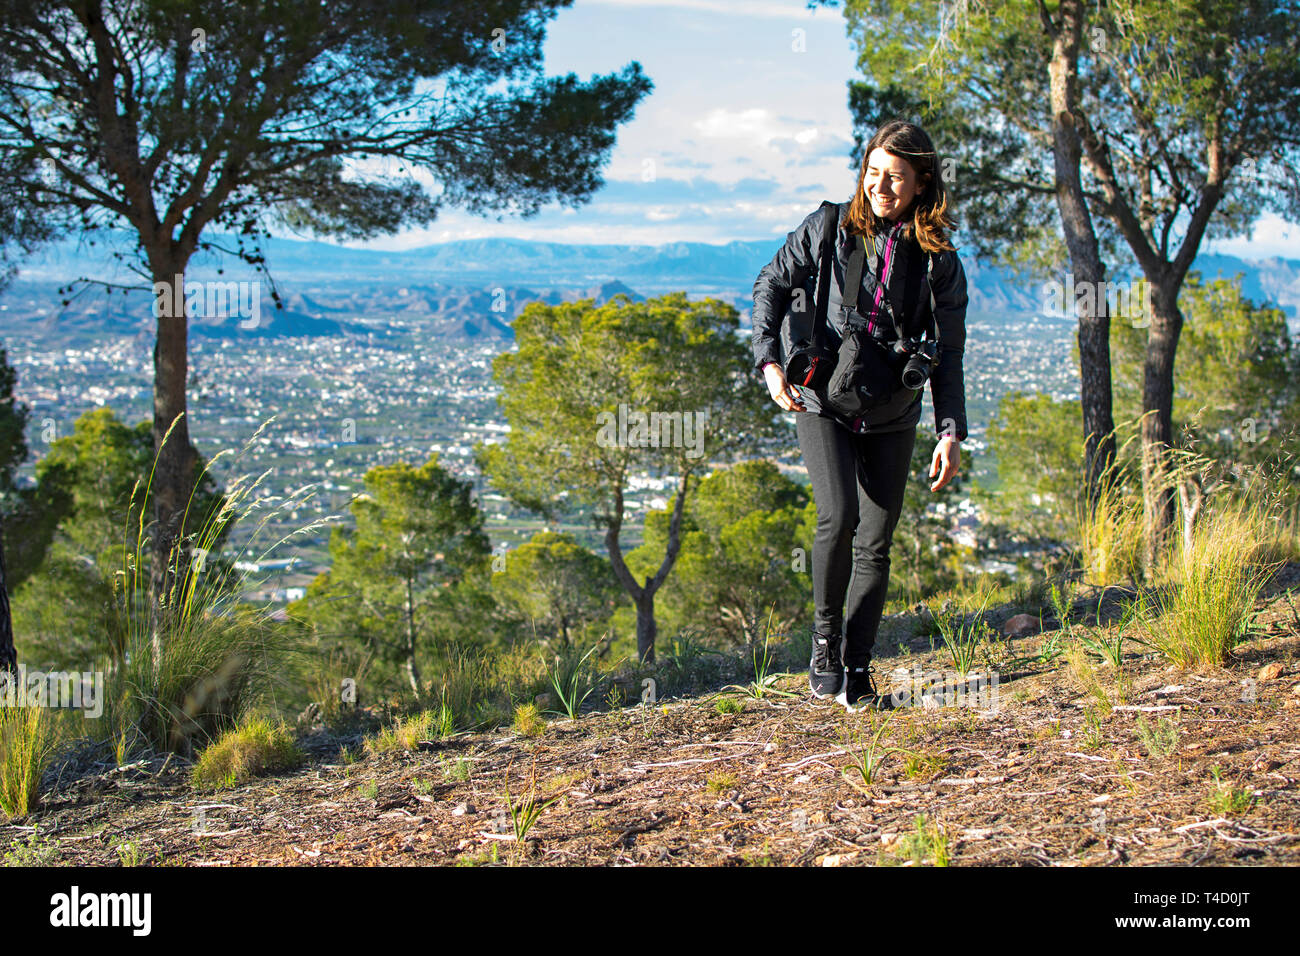 Murcia, Spain - April 9, 2019: cheerful young woman hiking and taking pictures with her reflex camera Stock Photo